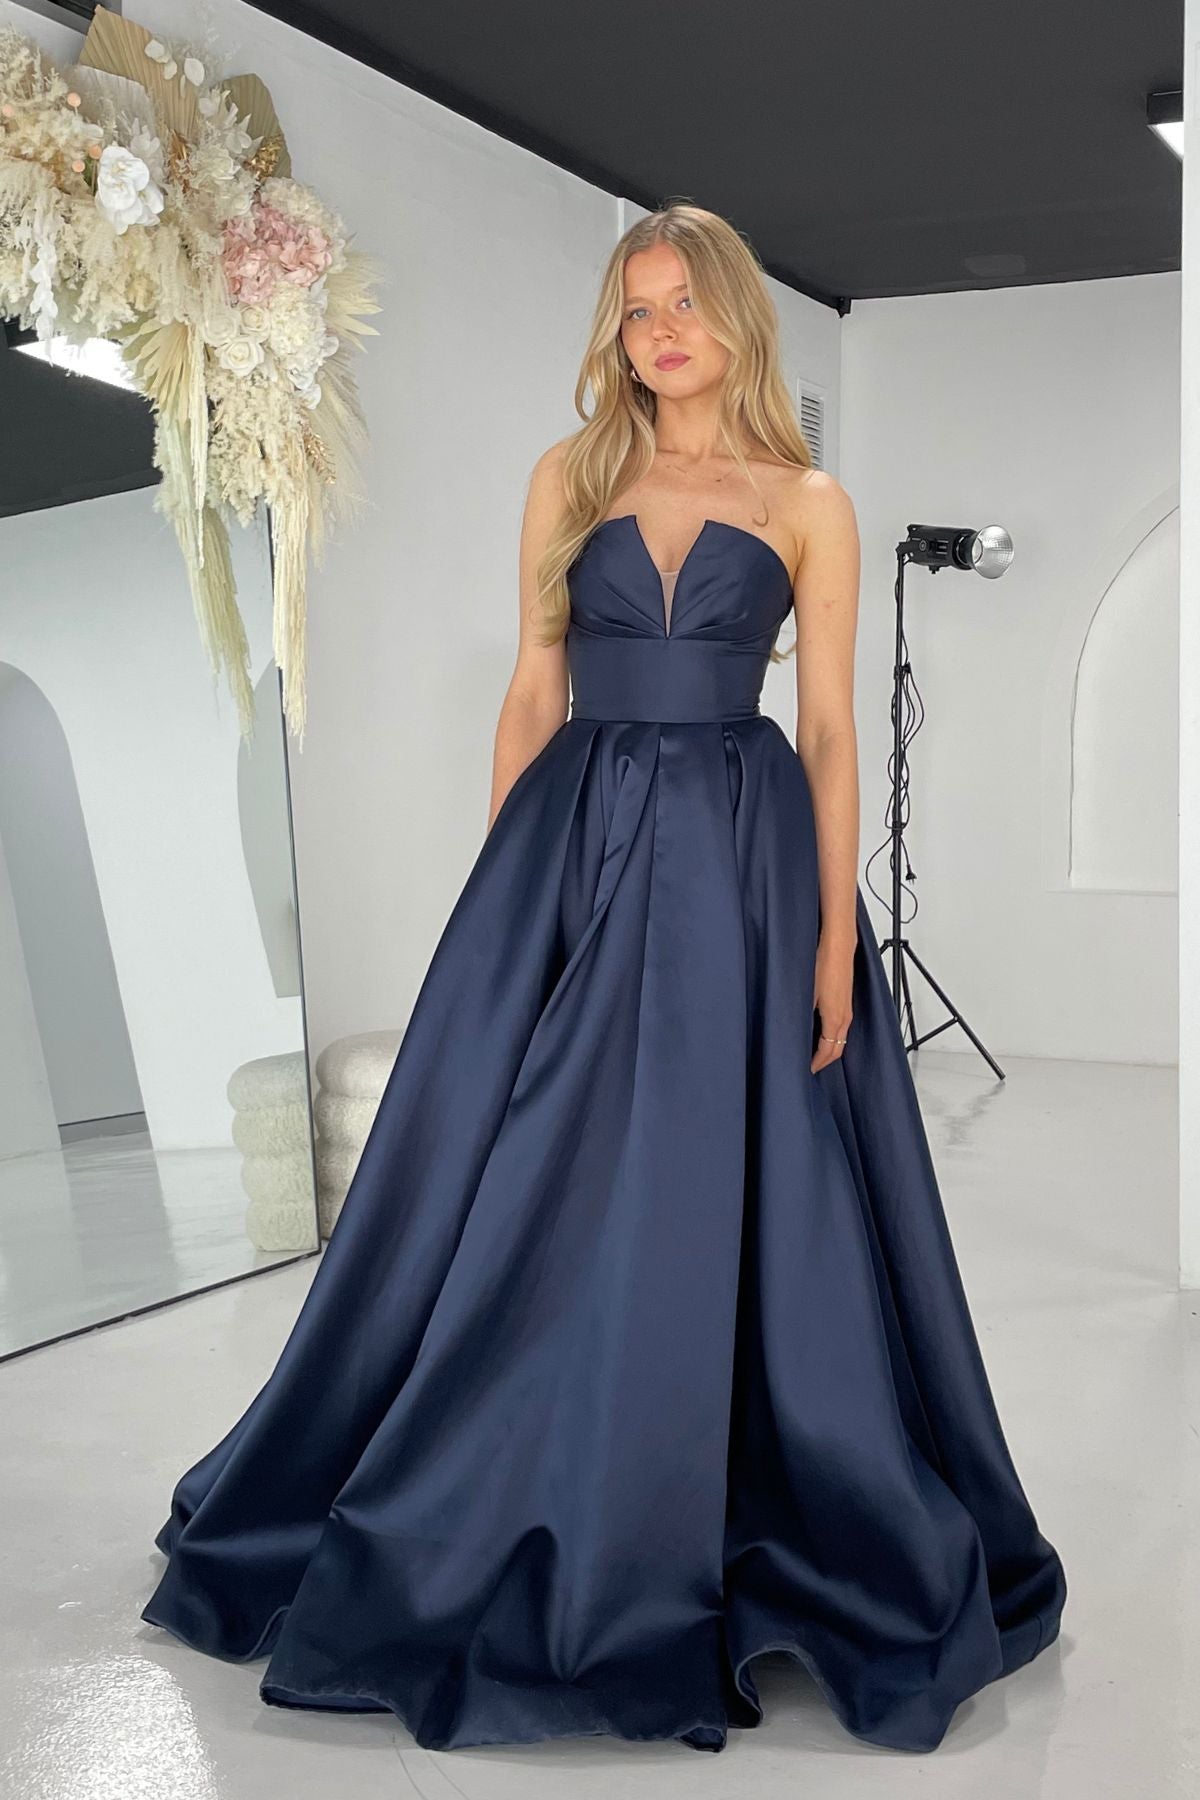 TINAHOLY Lucille Gown TA611 (Navy Blue) - RRP $440